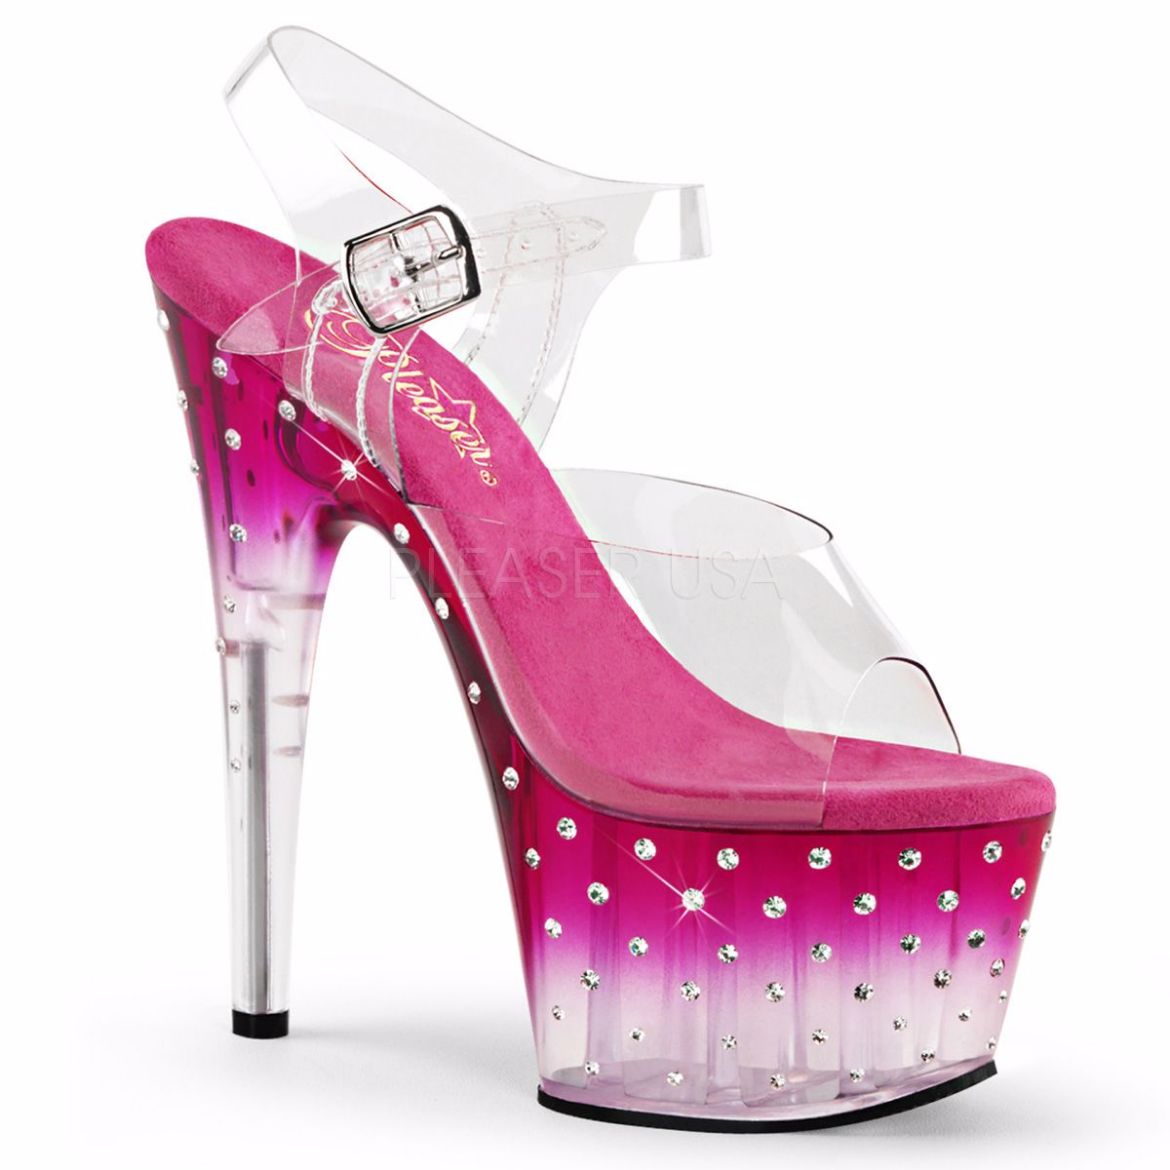 Product image of Pleaser Stardust-708T Clear/Pink-Clear, 7 inch (17.8 cm) Heel, 2 3/4 inch (7 cm) Platform Sandal Shoes